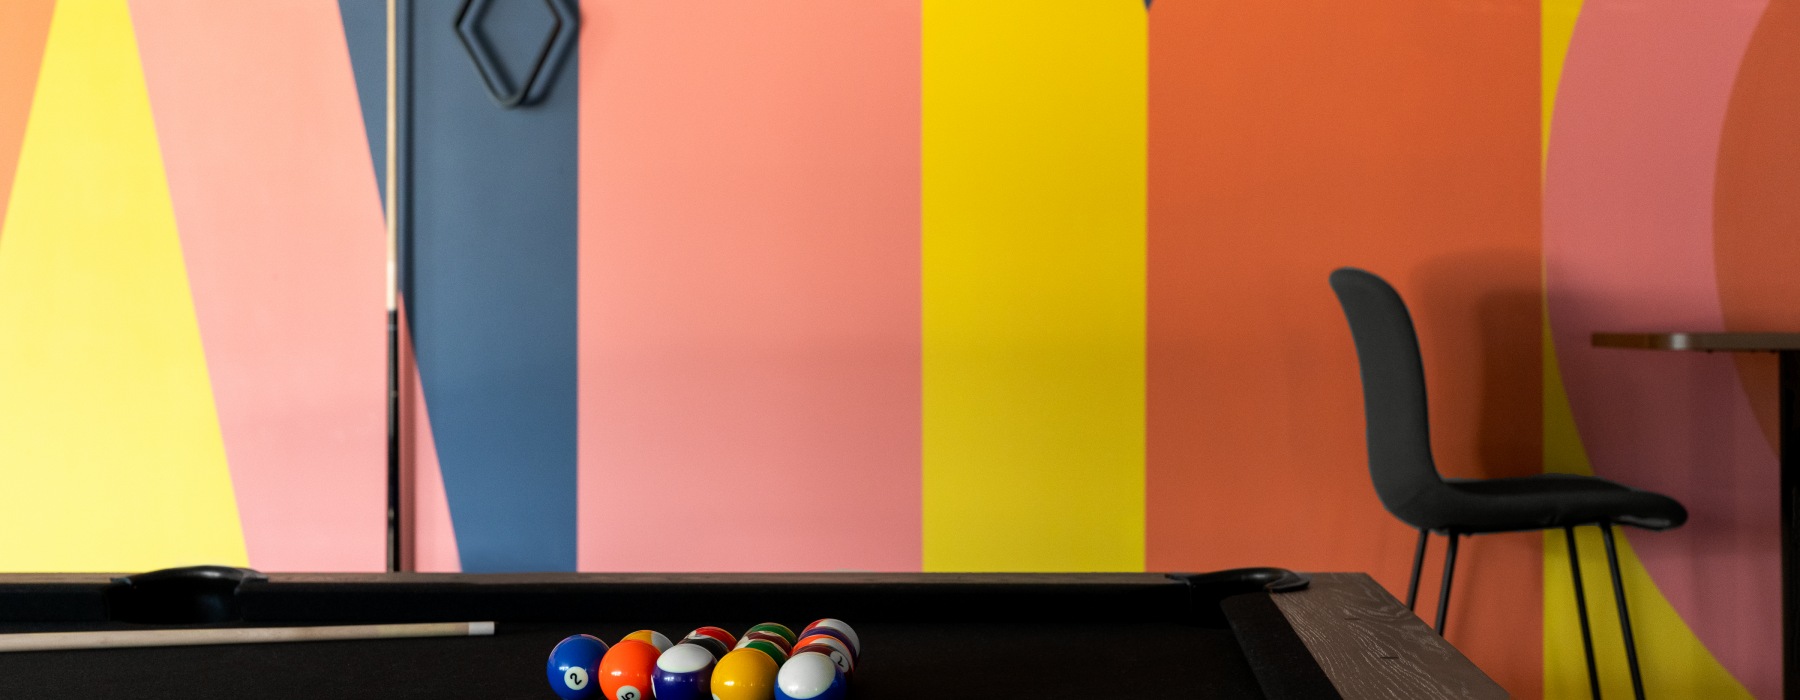 pool table against bright colored wall